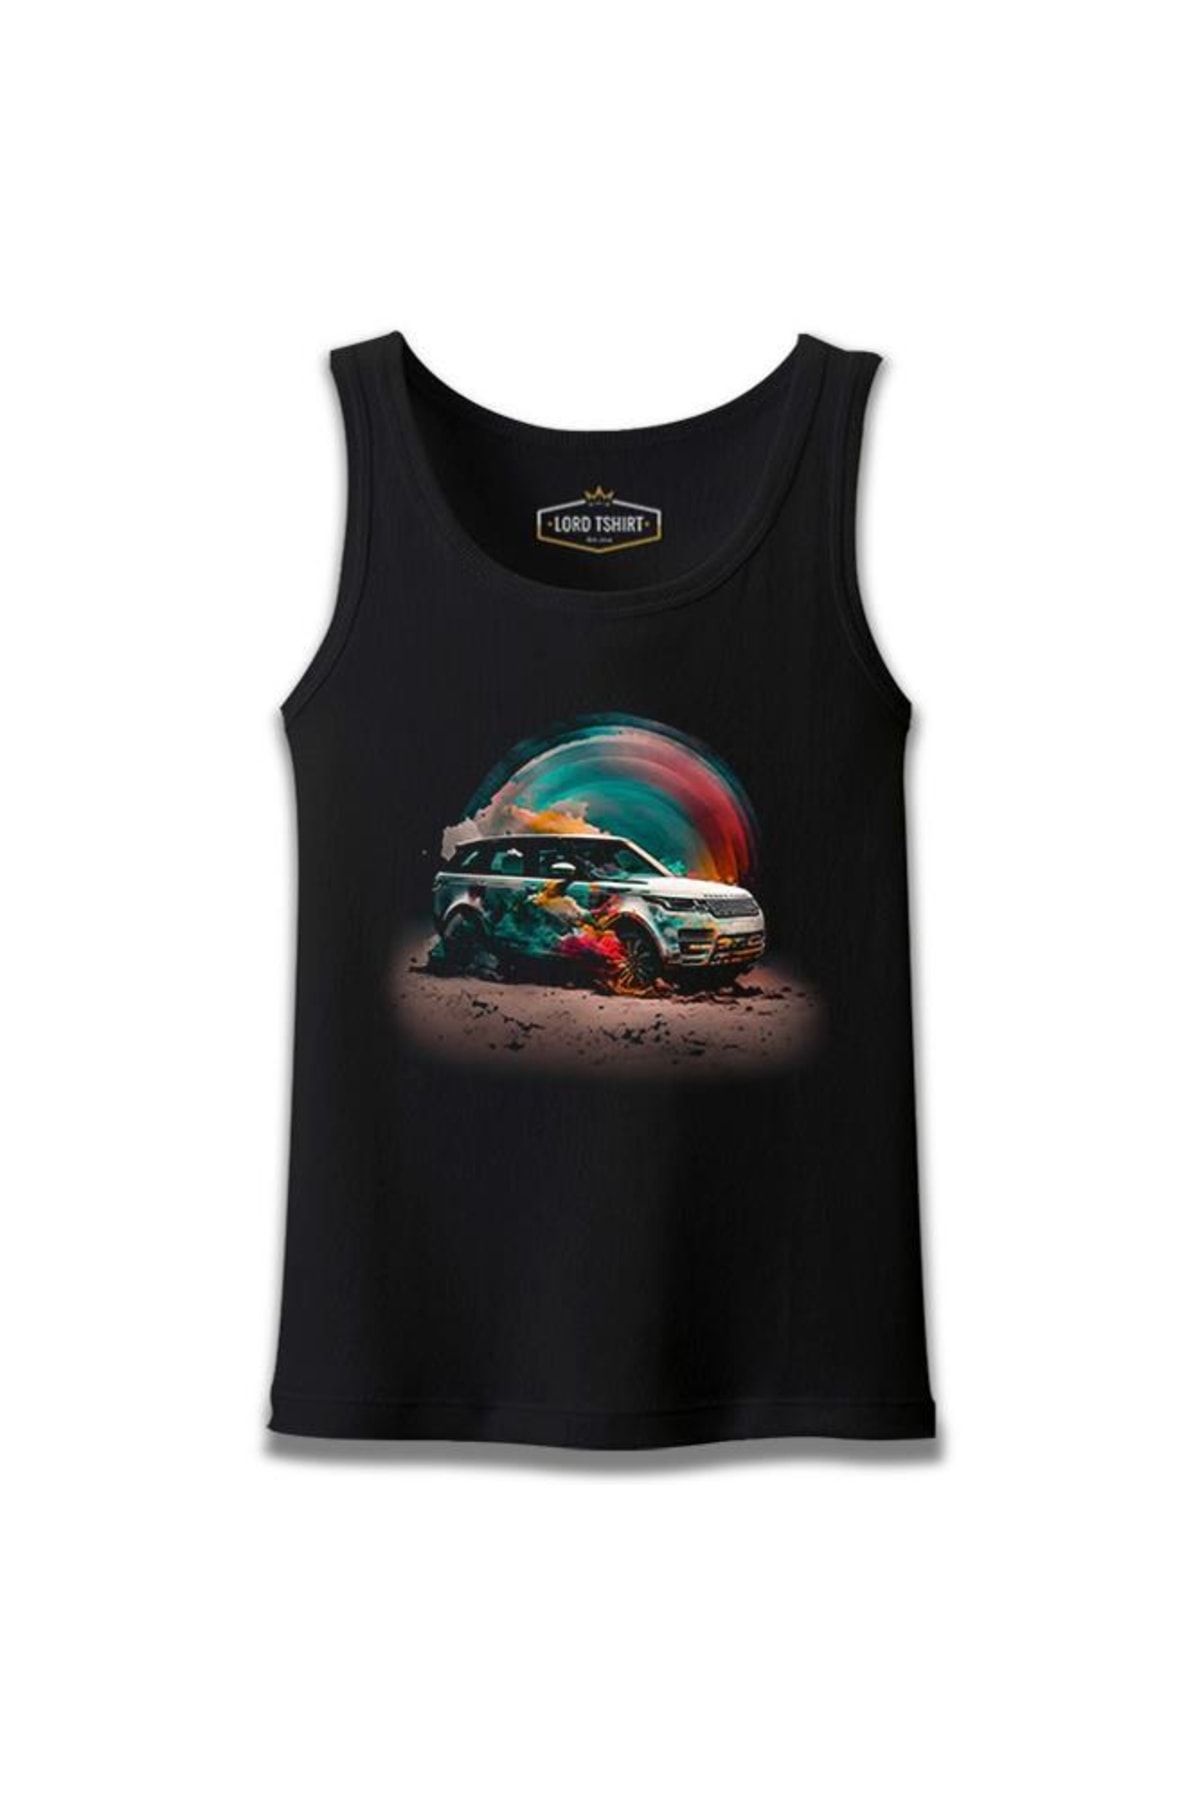 Lord T-Shirt Offroad Car With Colorful Dust Background Siyah Erkek Atlet